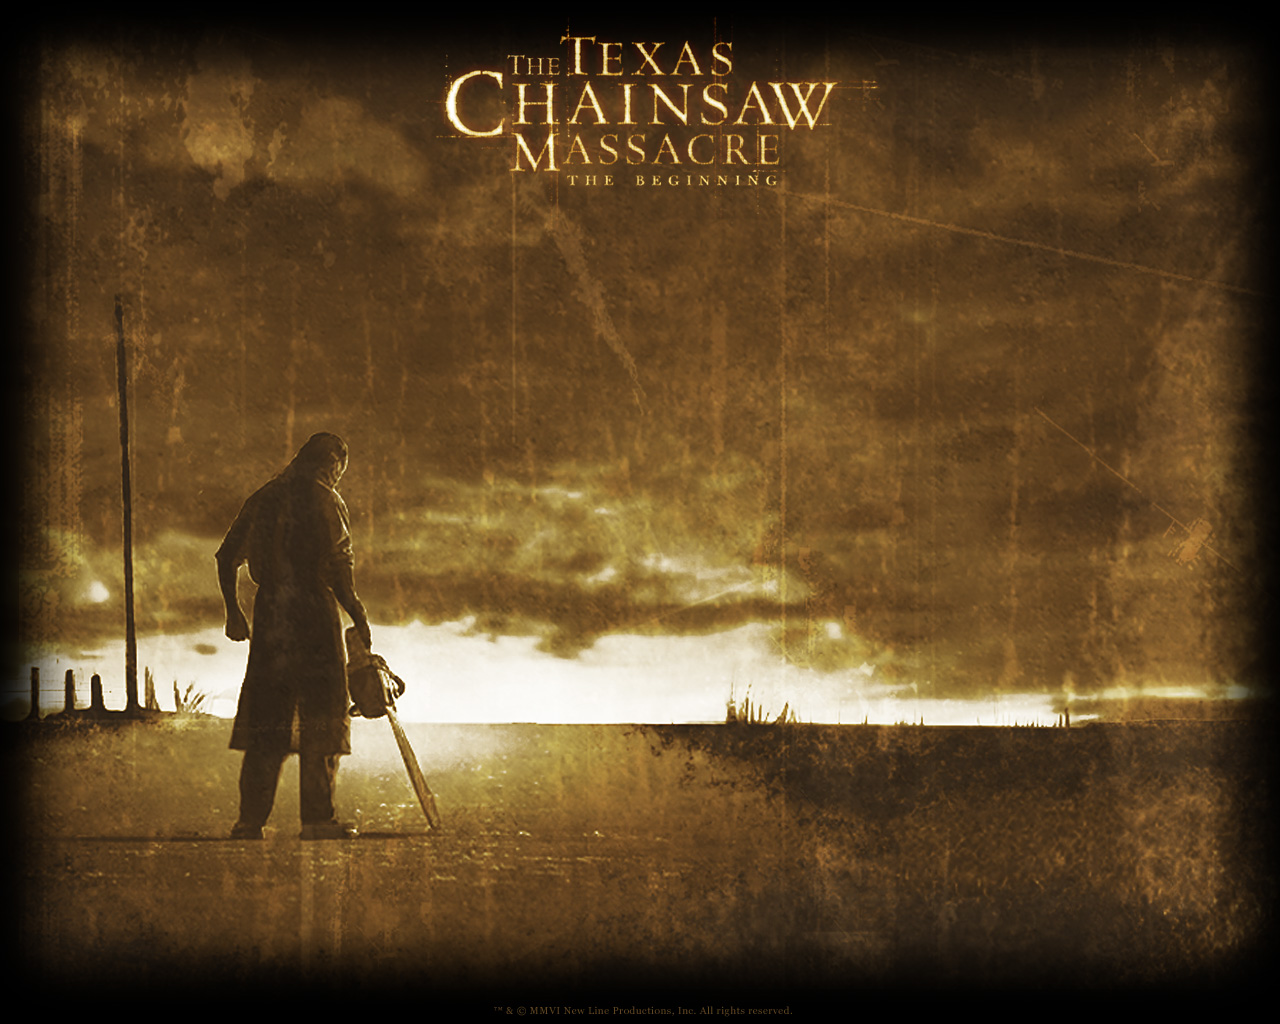 The Texas Chainsaw Massacre (2006) Images. 